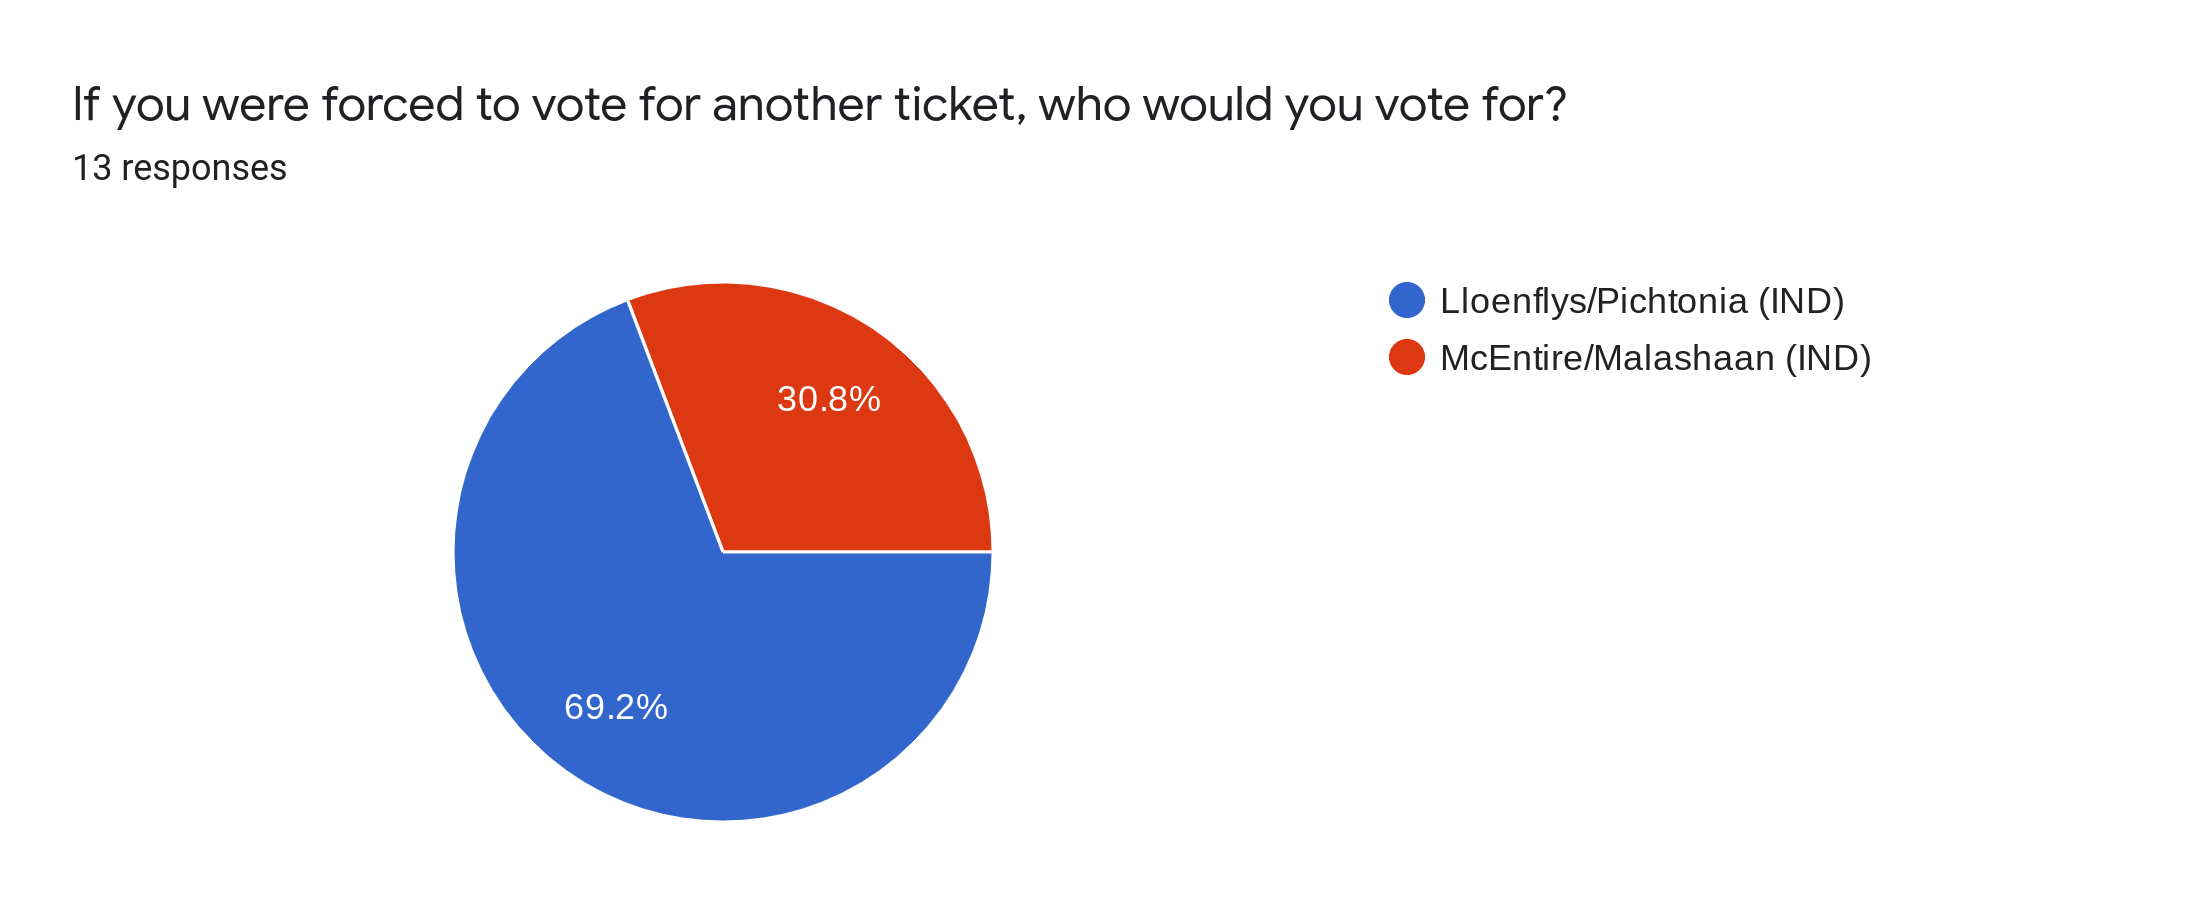 Forms response chart. Question title: If you were forced to vote for another ticket, who would you vote for?. Number of responses: 13 responses.